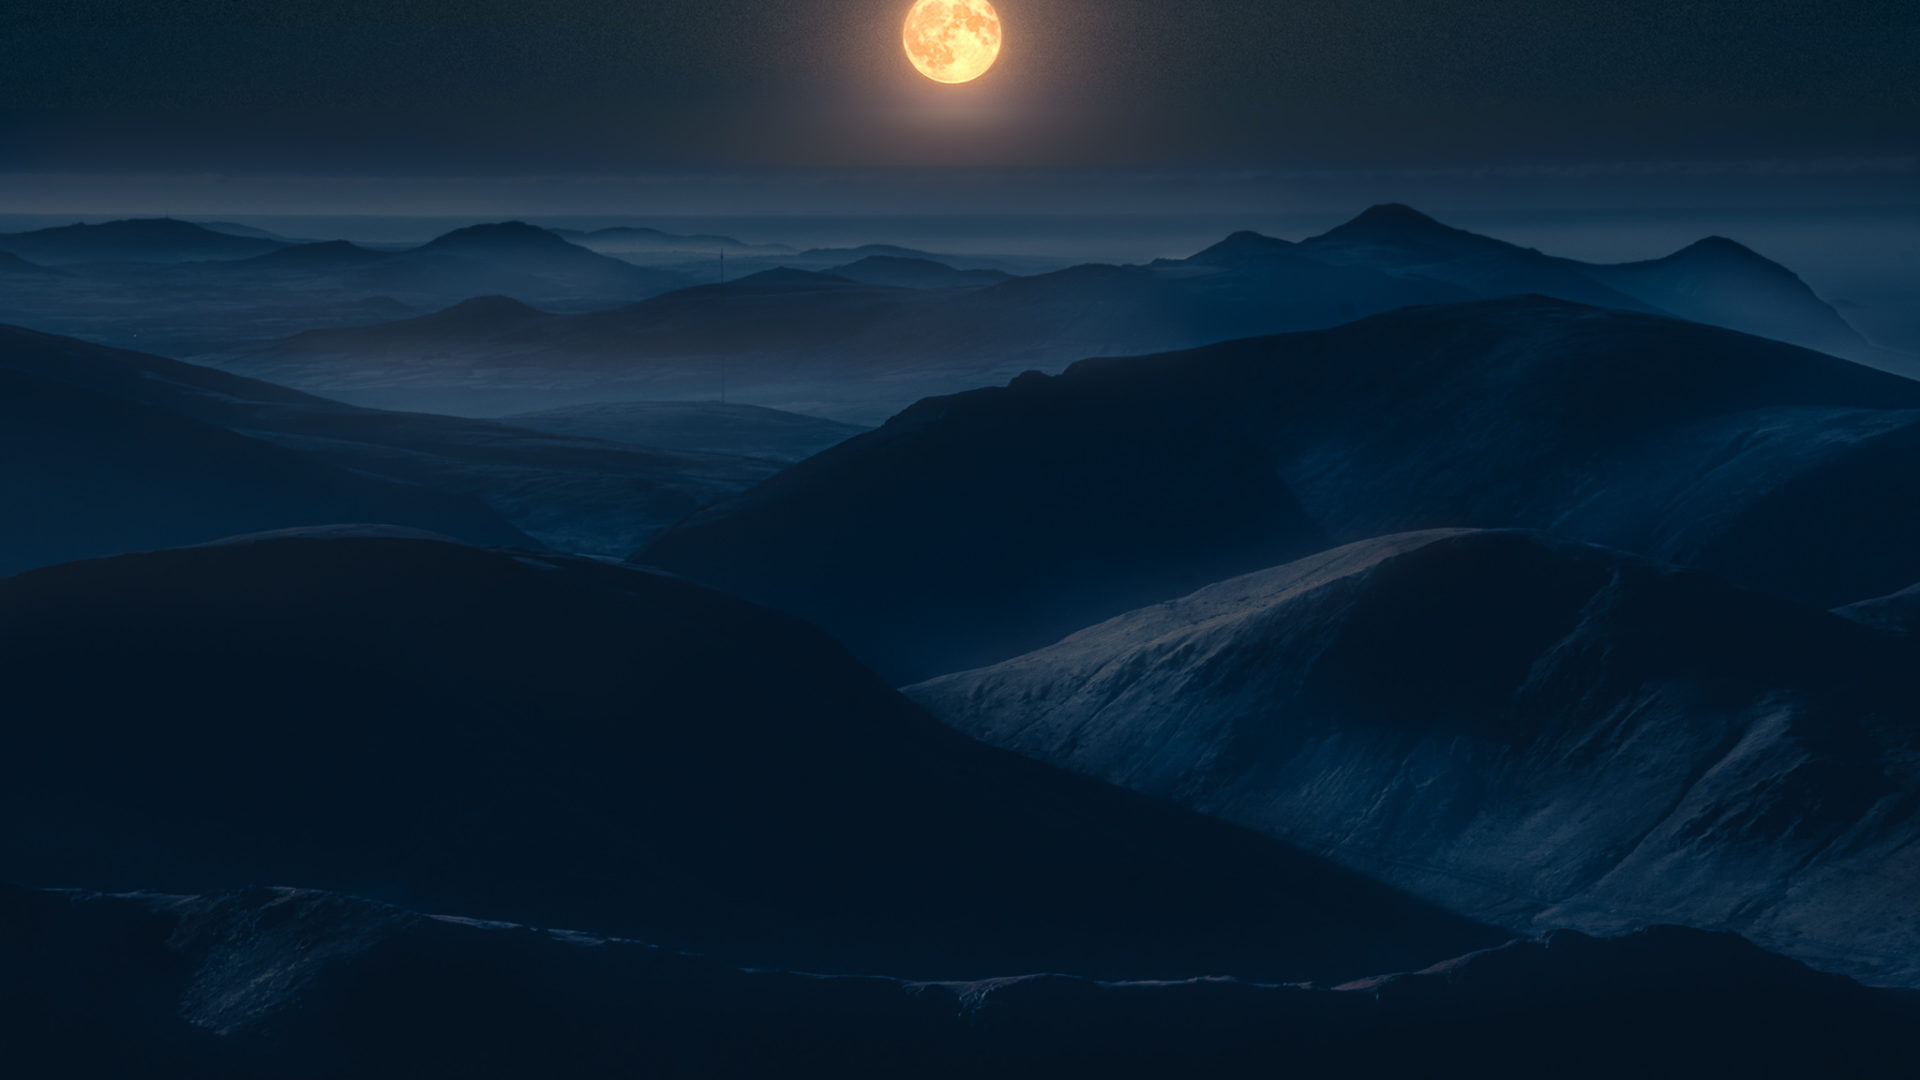 A large full moon above some mountains